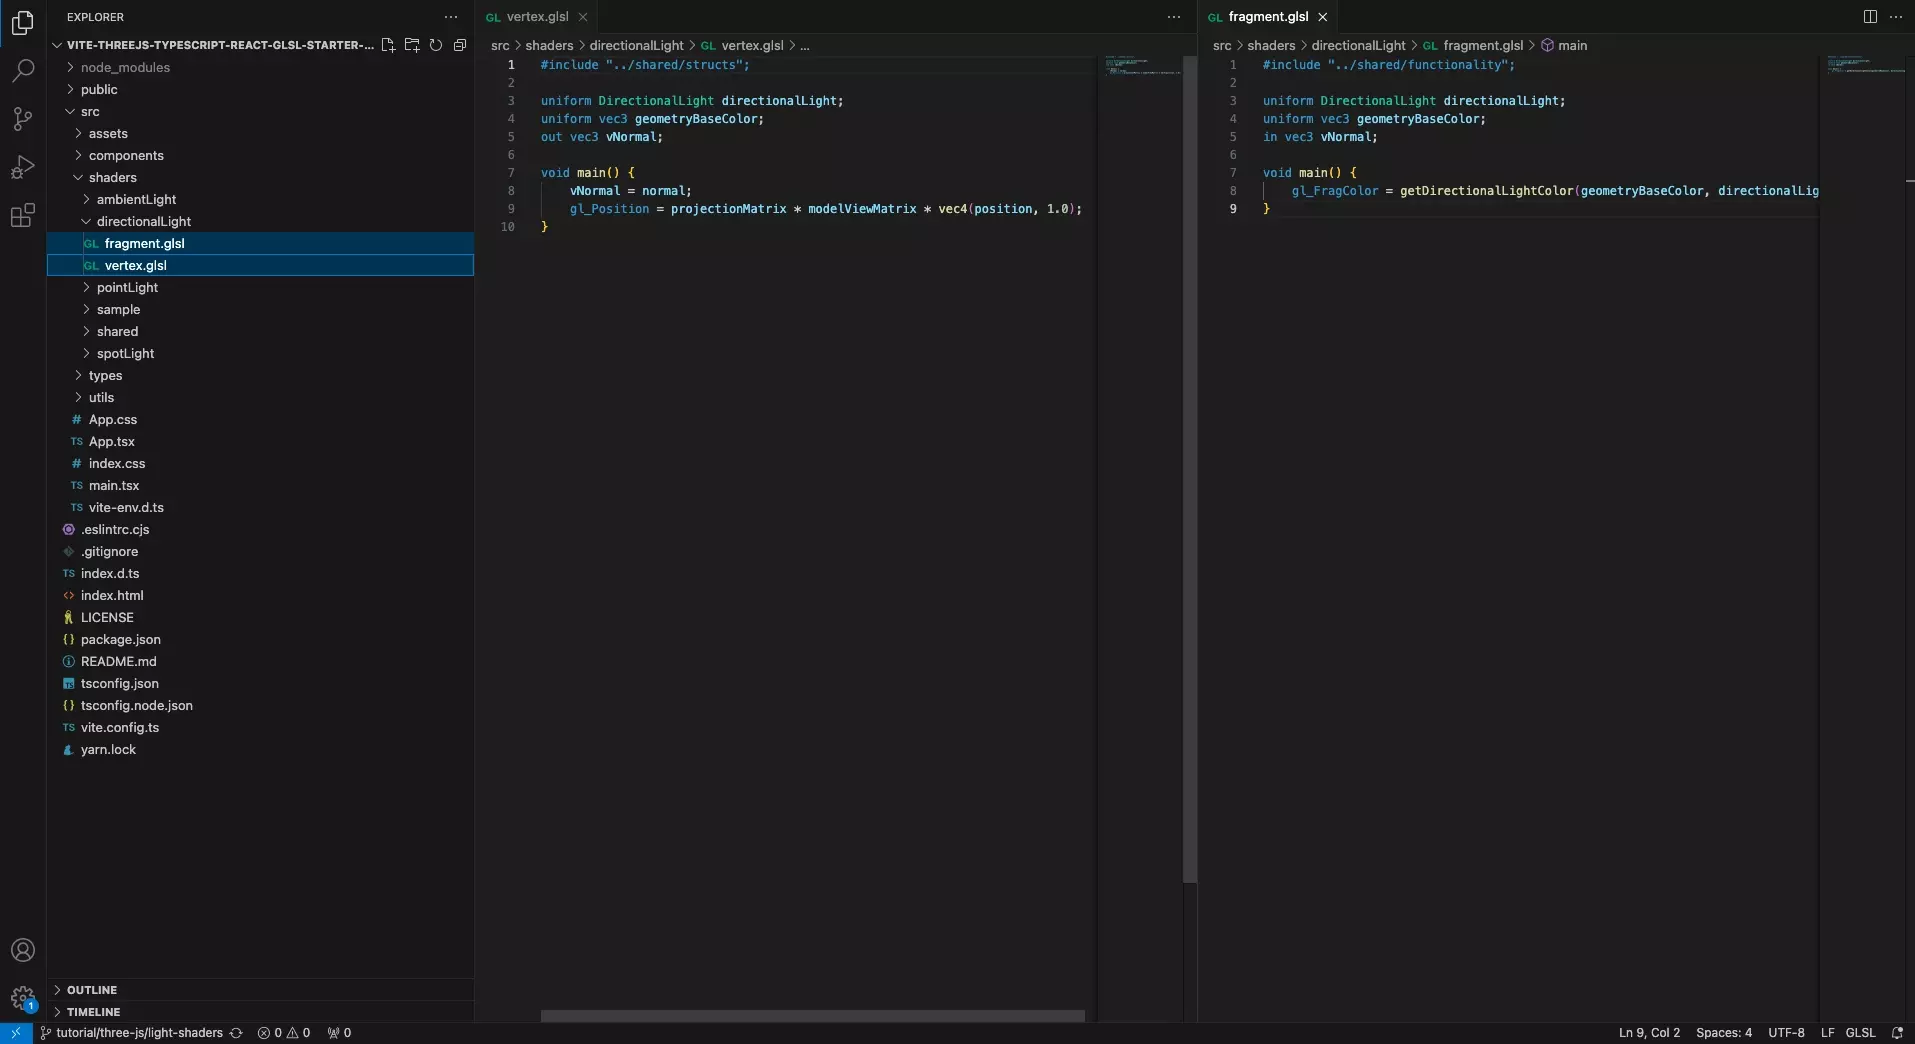 A screenshot of VSCode showing the directional light vertex and fragment shader.